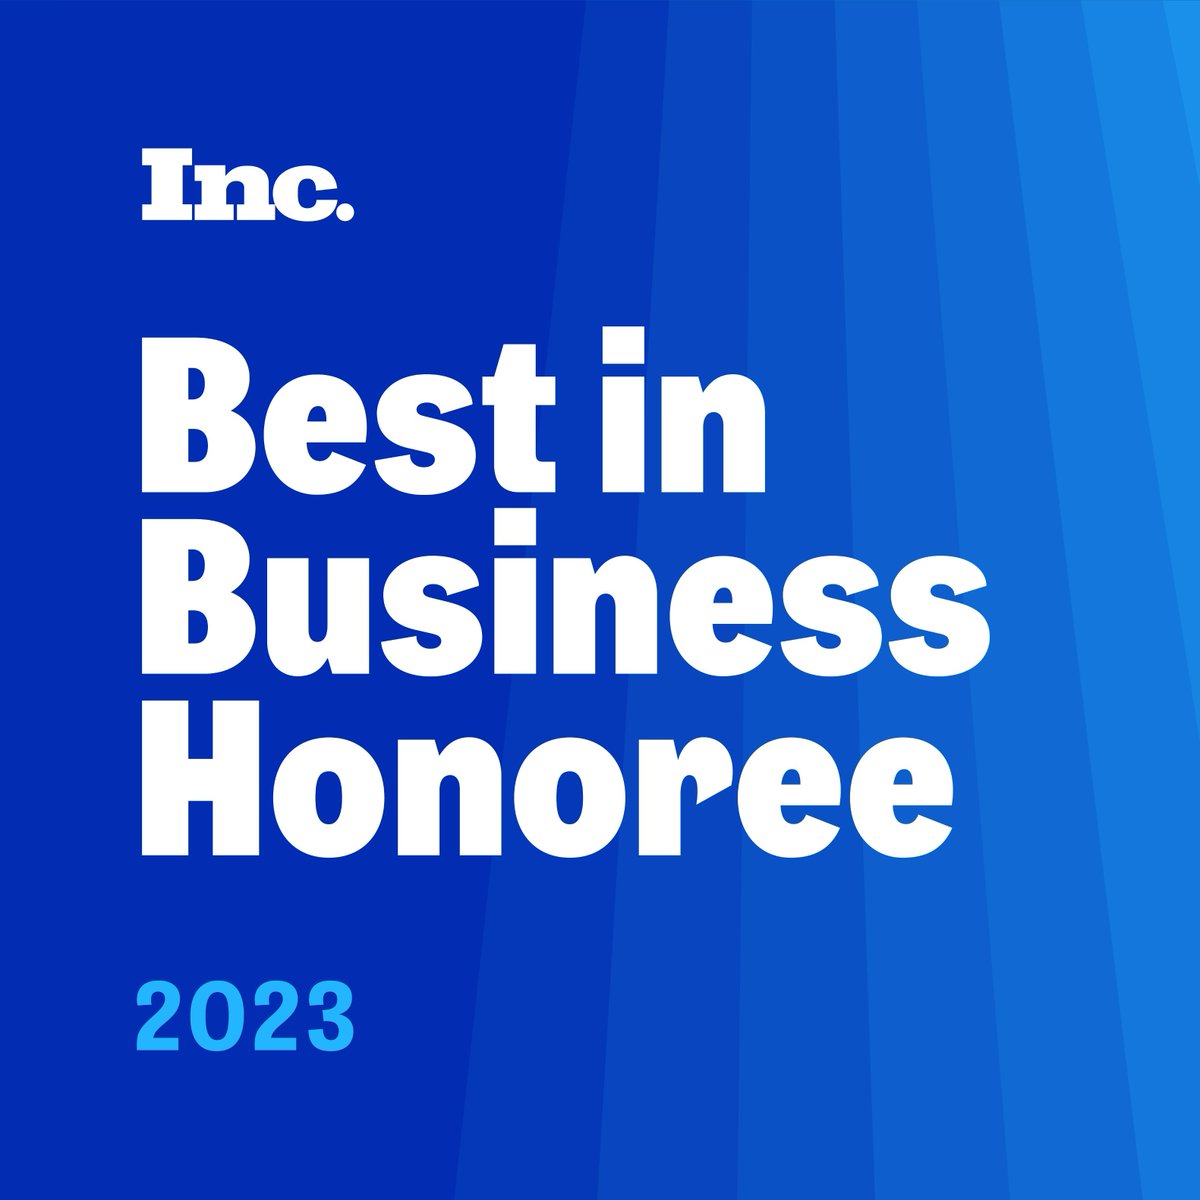 🏆Big News!🏆The Biz2Credit team is proud to announce we are one of @Inc's 2023 #BestInBusiness honorees! Check out the whole list here: inc.com/best-in-busine… #BestInBusiness #award #2023 #Inc #biz2credit #honnored #fintech #finance